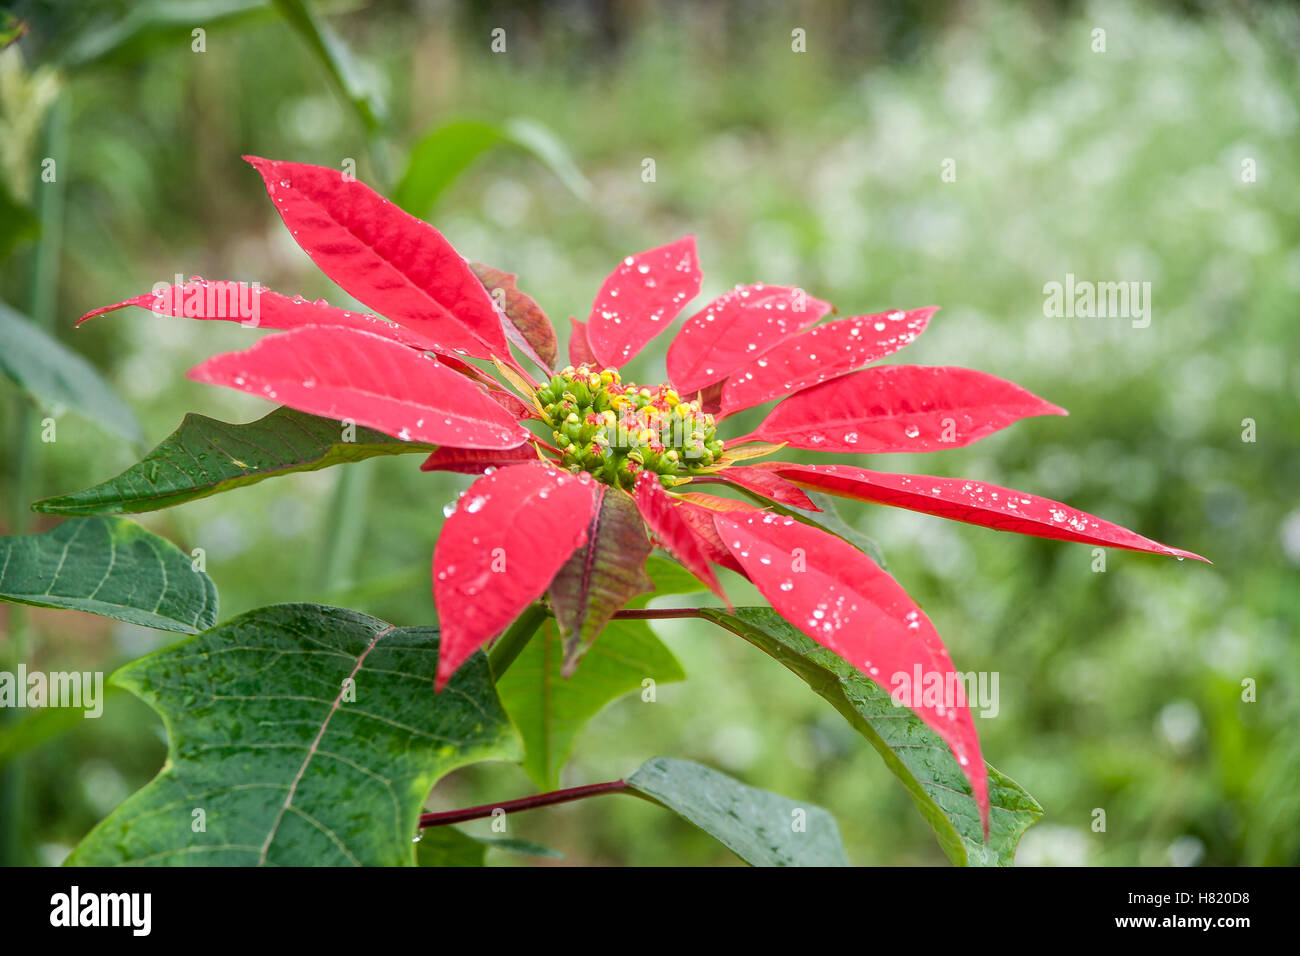 Big red flower of poinsettia Stock Photo